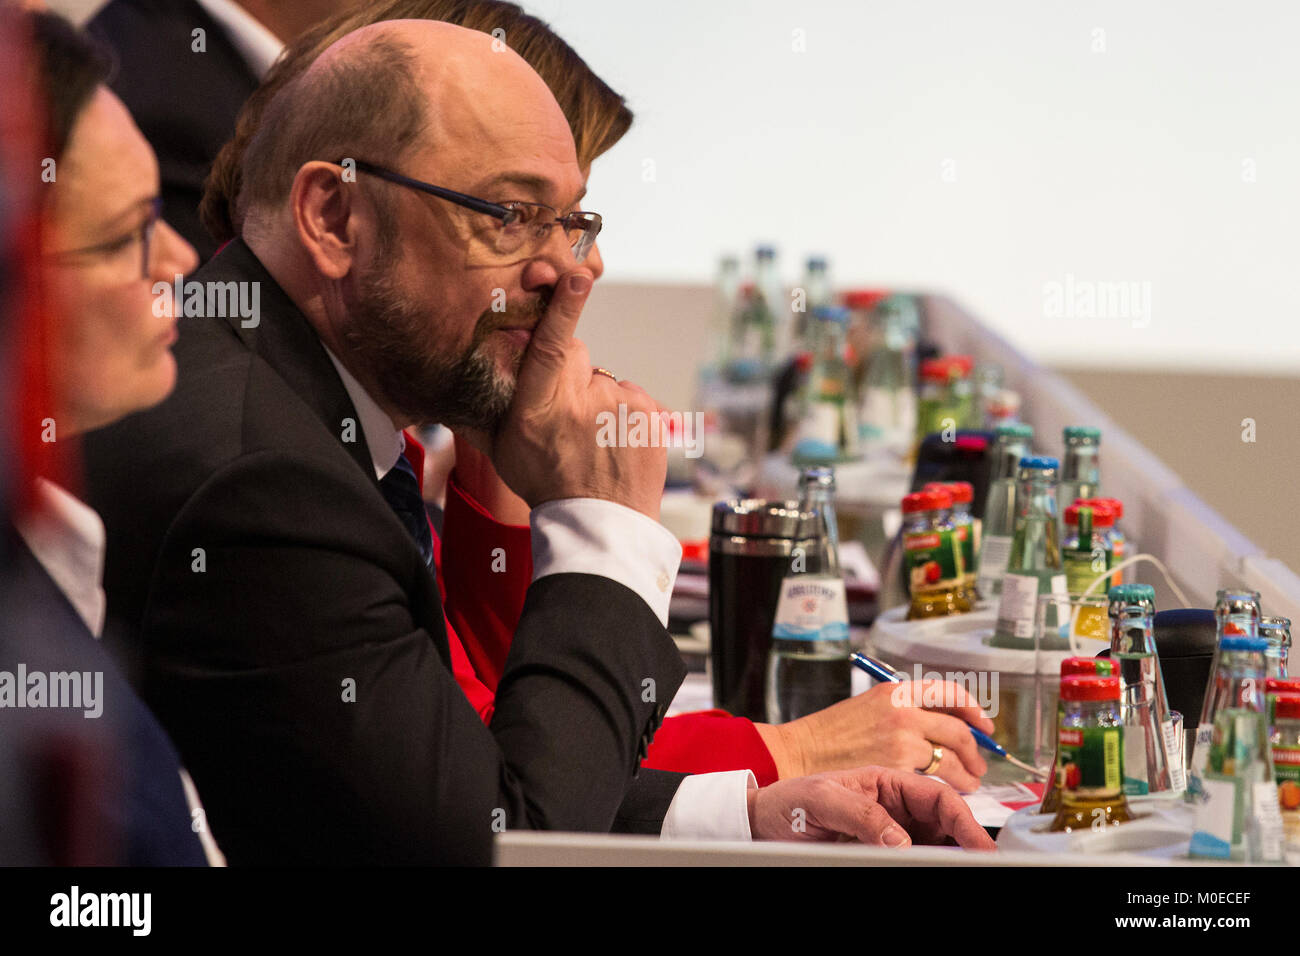 Bonn, Germany. 21 January 2018. L-R: Andrea Nahles, Martin Schulz. SPD extraordinary party convention at World Conference Center Bonn to discuss and approve options to enter into a grand coalition with the CDU, Christian Democrats, before asking SPD members for approval. Photo: Bettina Strenske/Alamy Live News Stock Photo